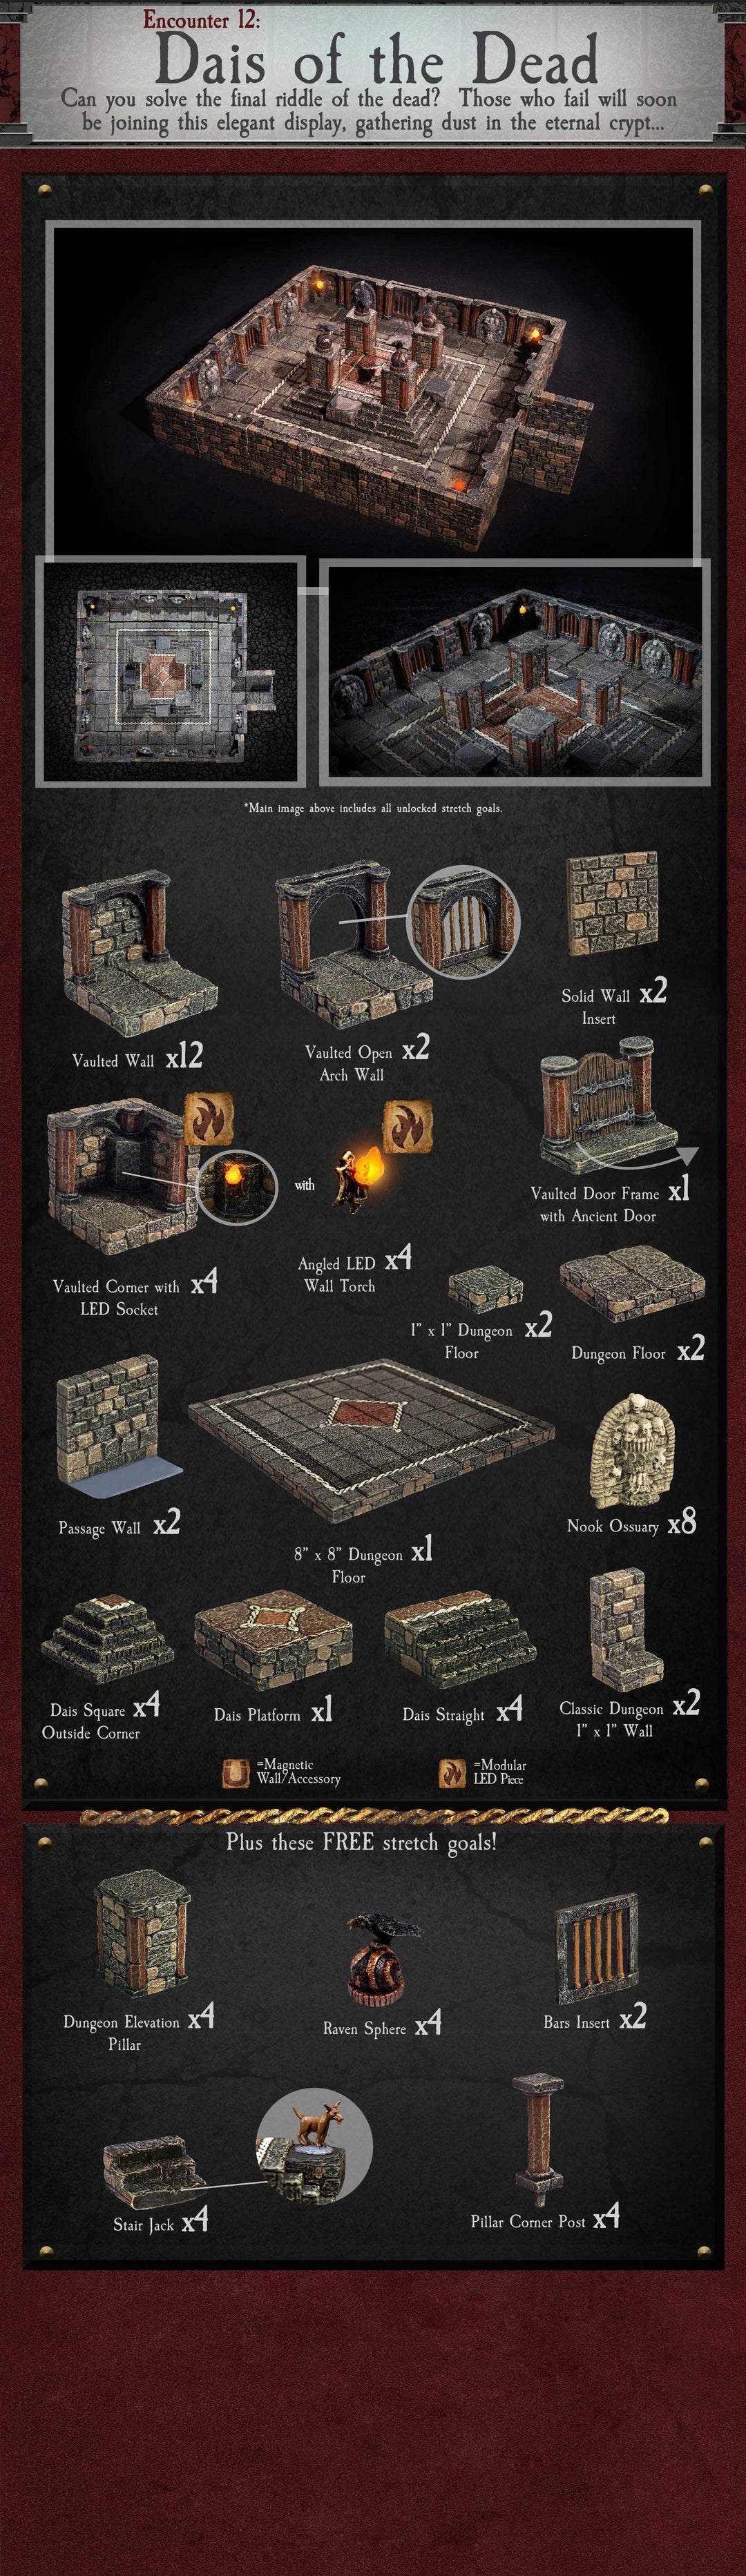 Encounter Area 12: Dais of the Dead - Painted